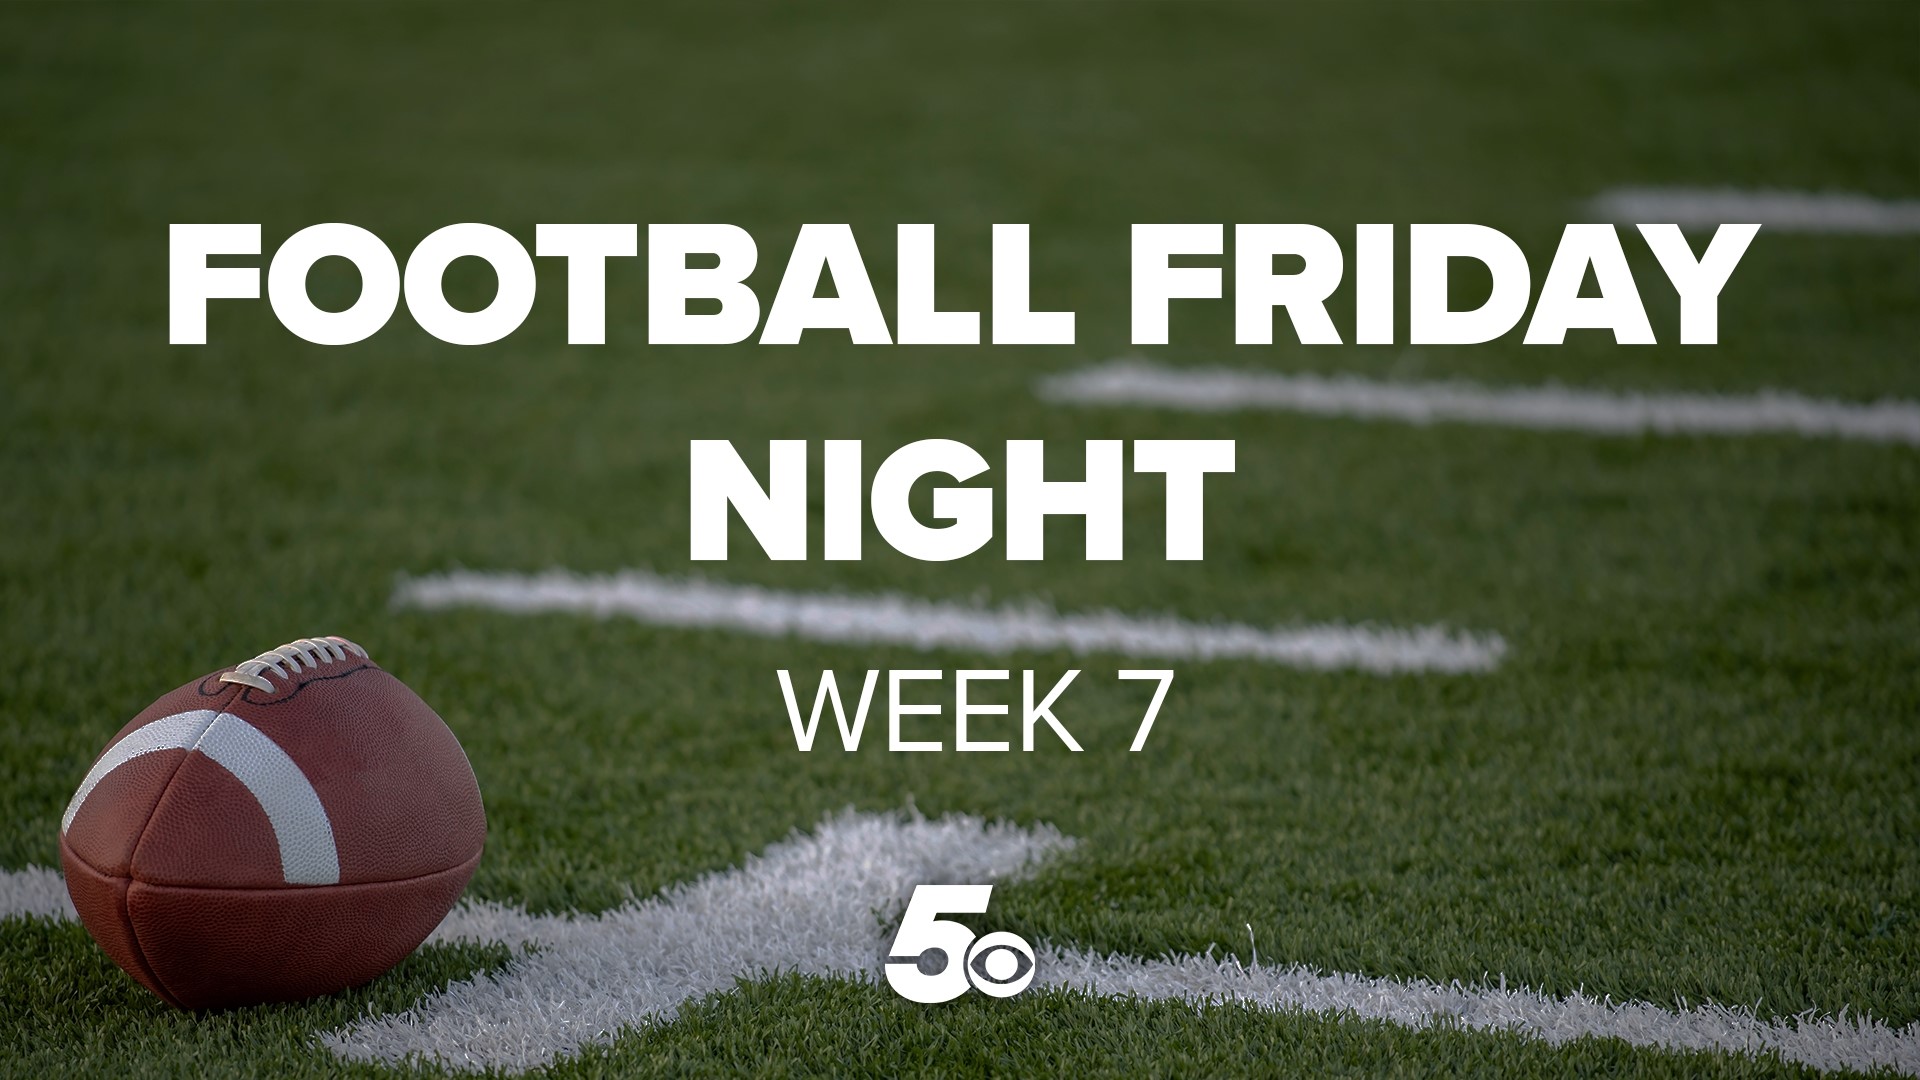 Jacob and Jonathan give us a rundown of all the highlights and final scores for high school Football Friday Night Week 7 in Northwest Arkansas and the River Valley.